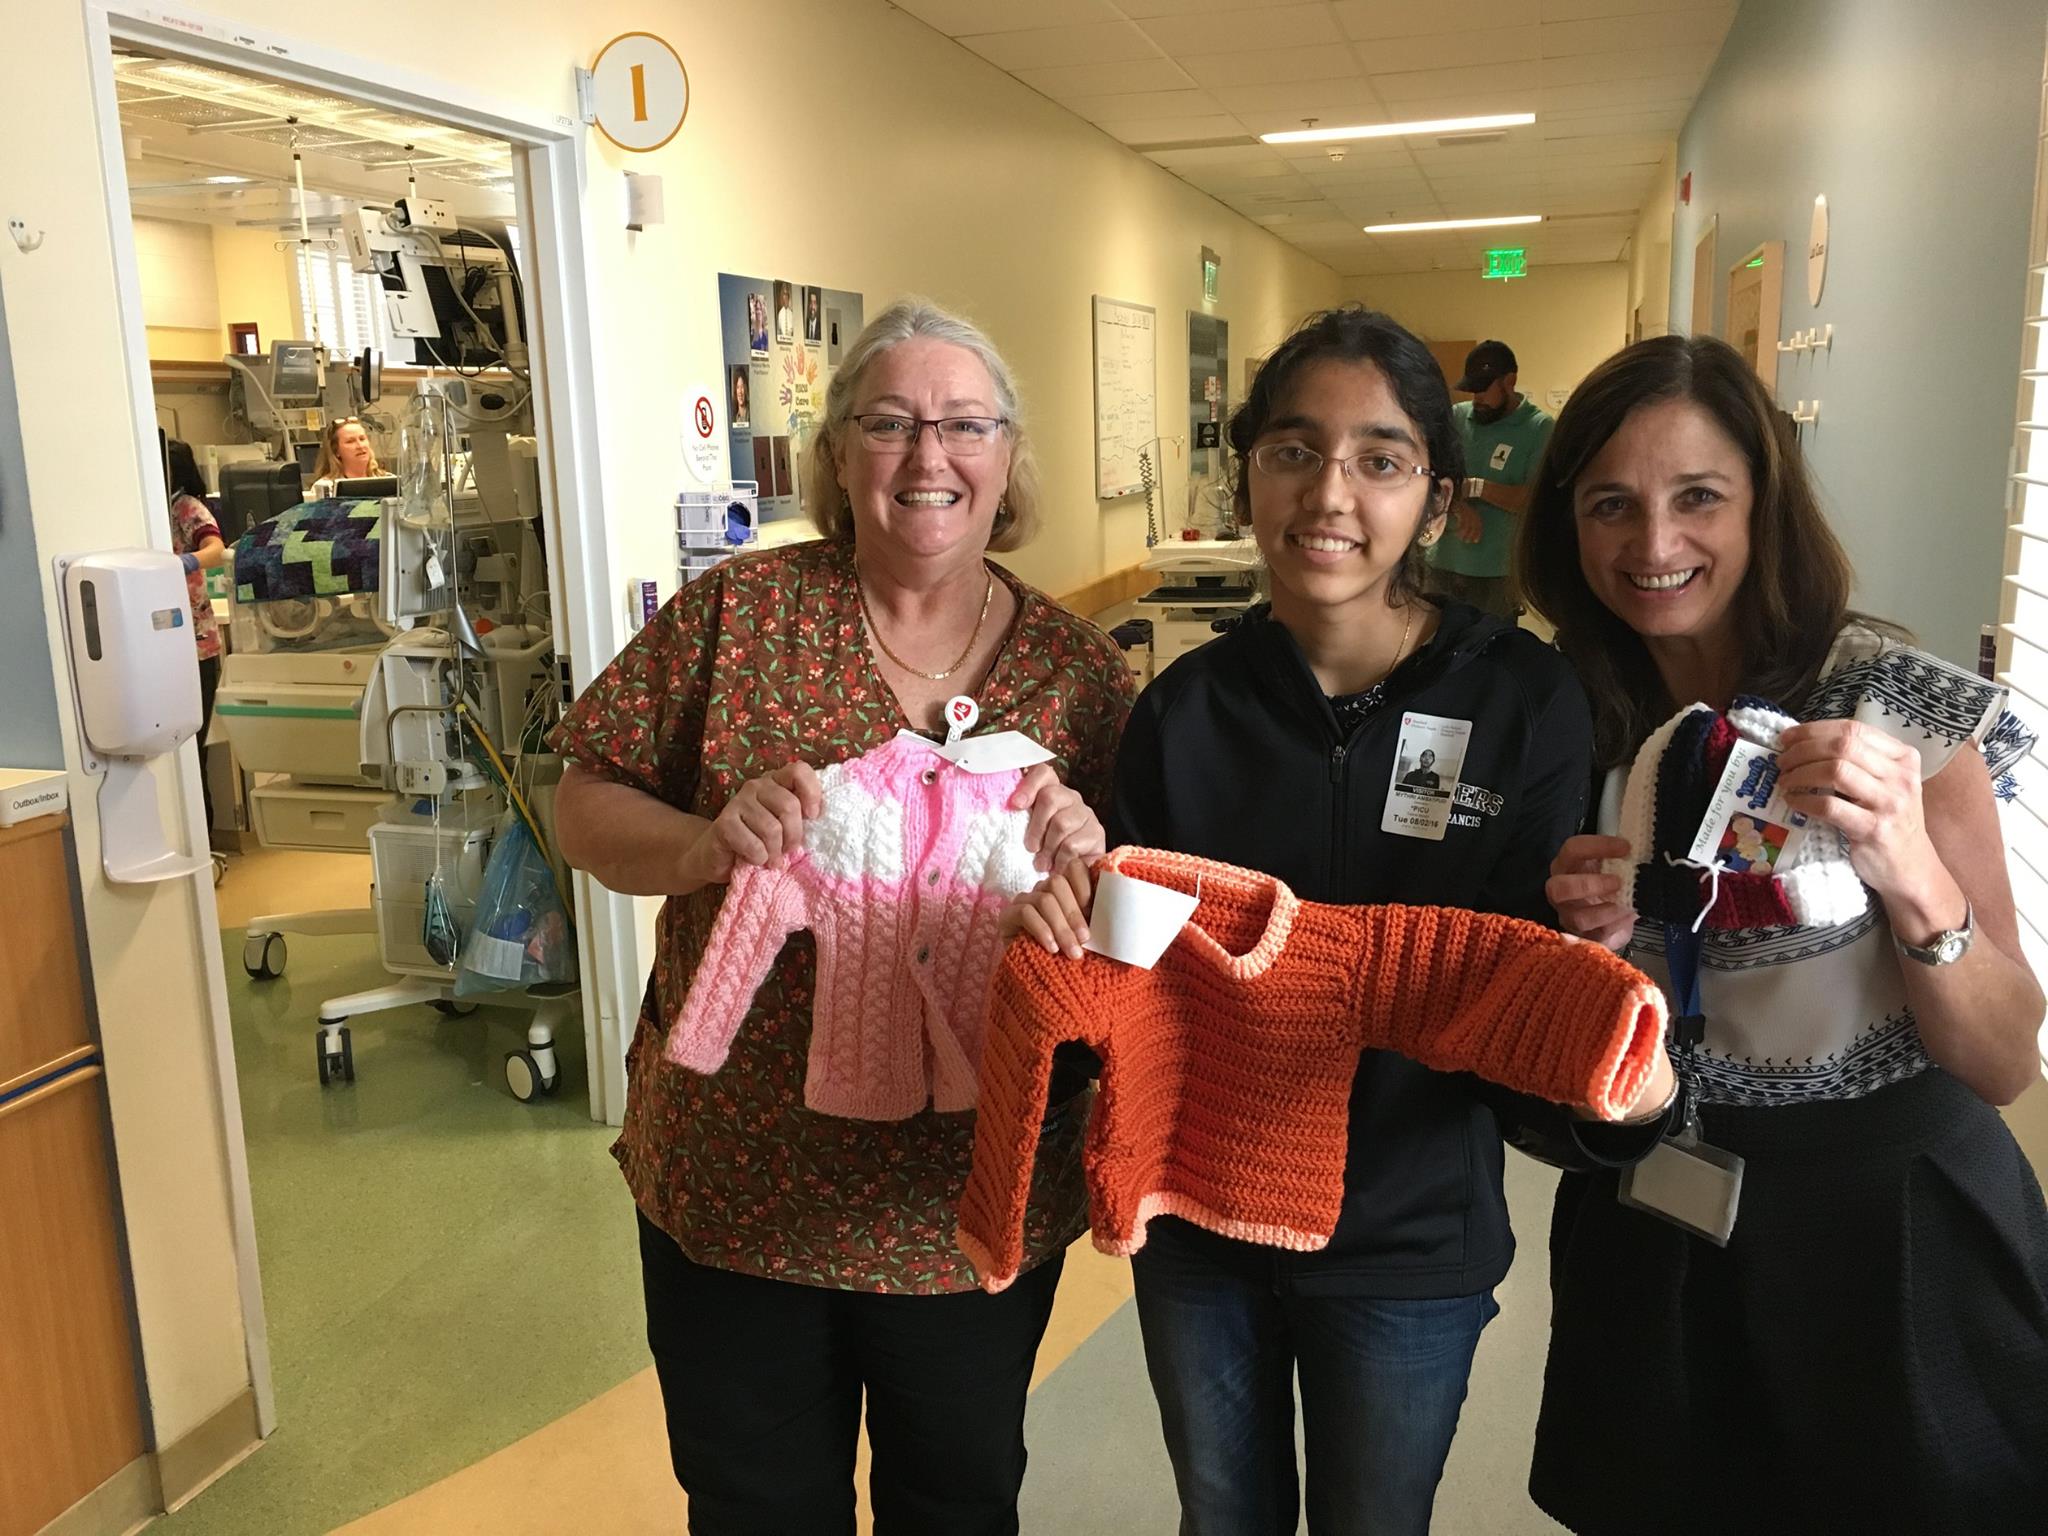 With Ms. Eve Shaw and NICU nurse at Lucile Packard Children's Hospital